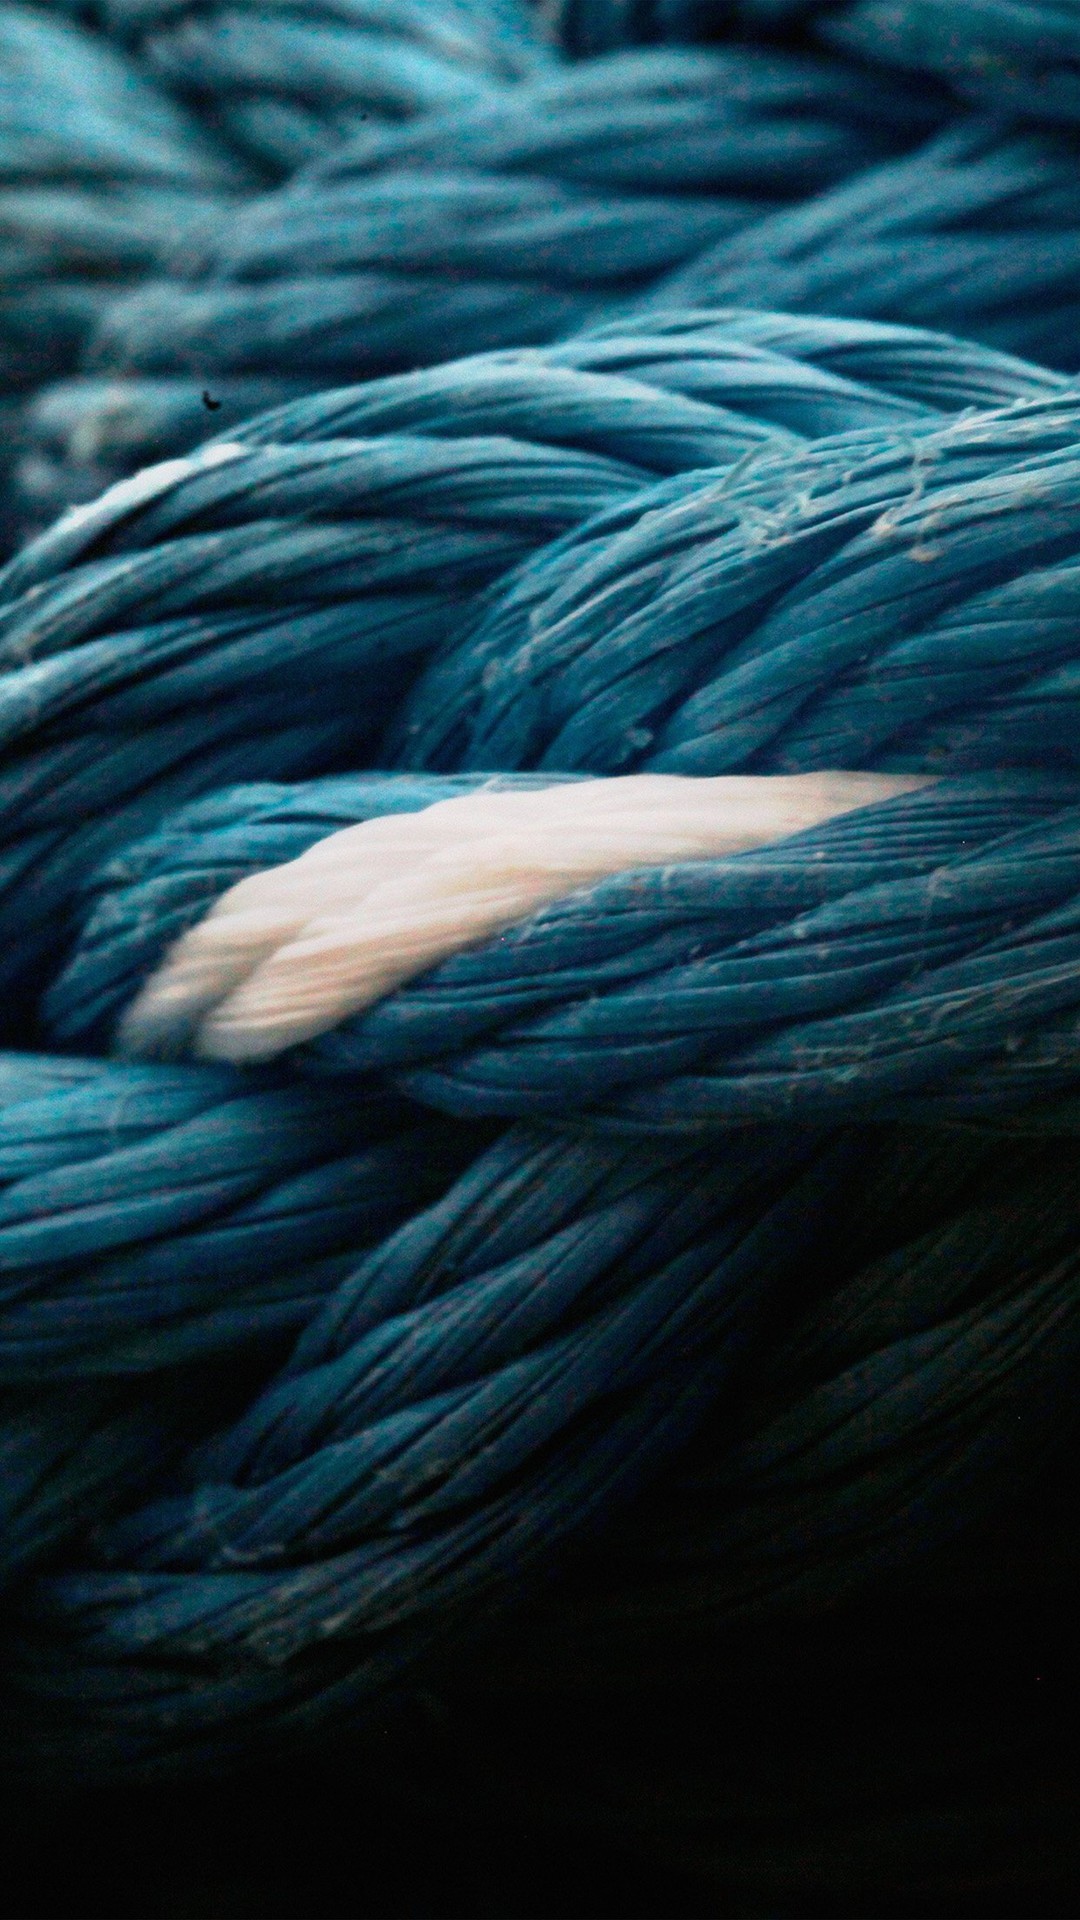 1080x1920 Rope Blue Knot Texture #iPhone #7 #wallpaper